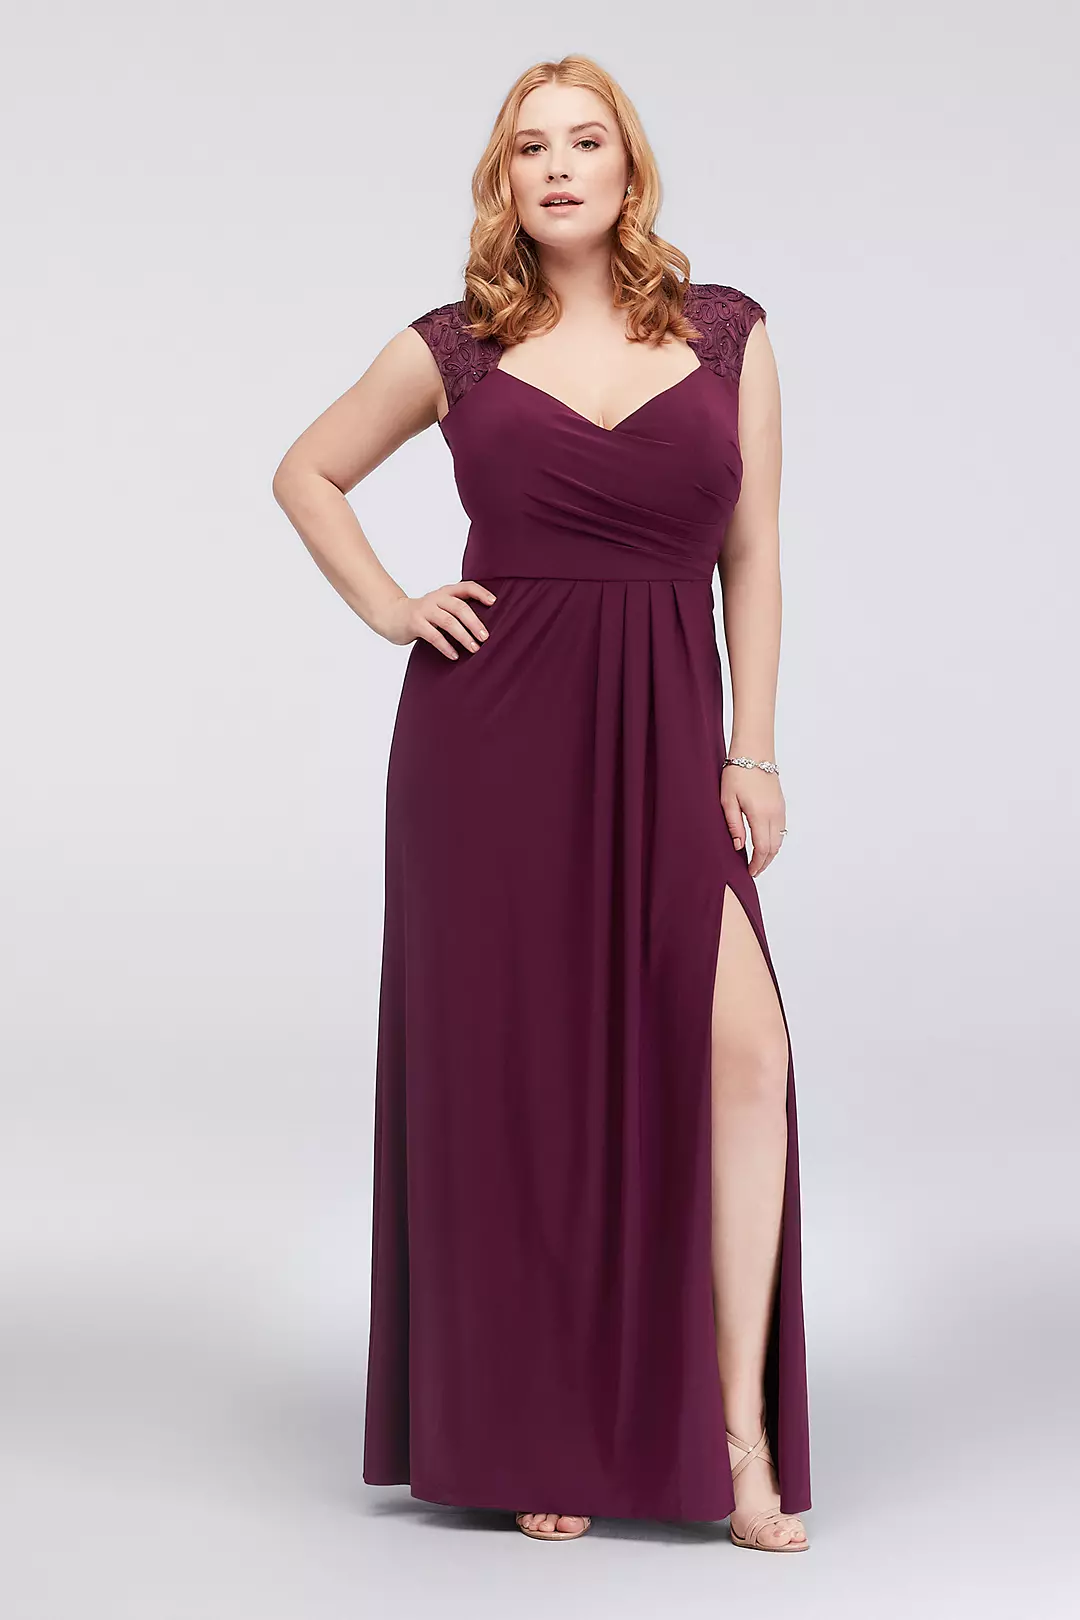 Piped Jersey Sheath Dress with Illusion Back Image